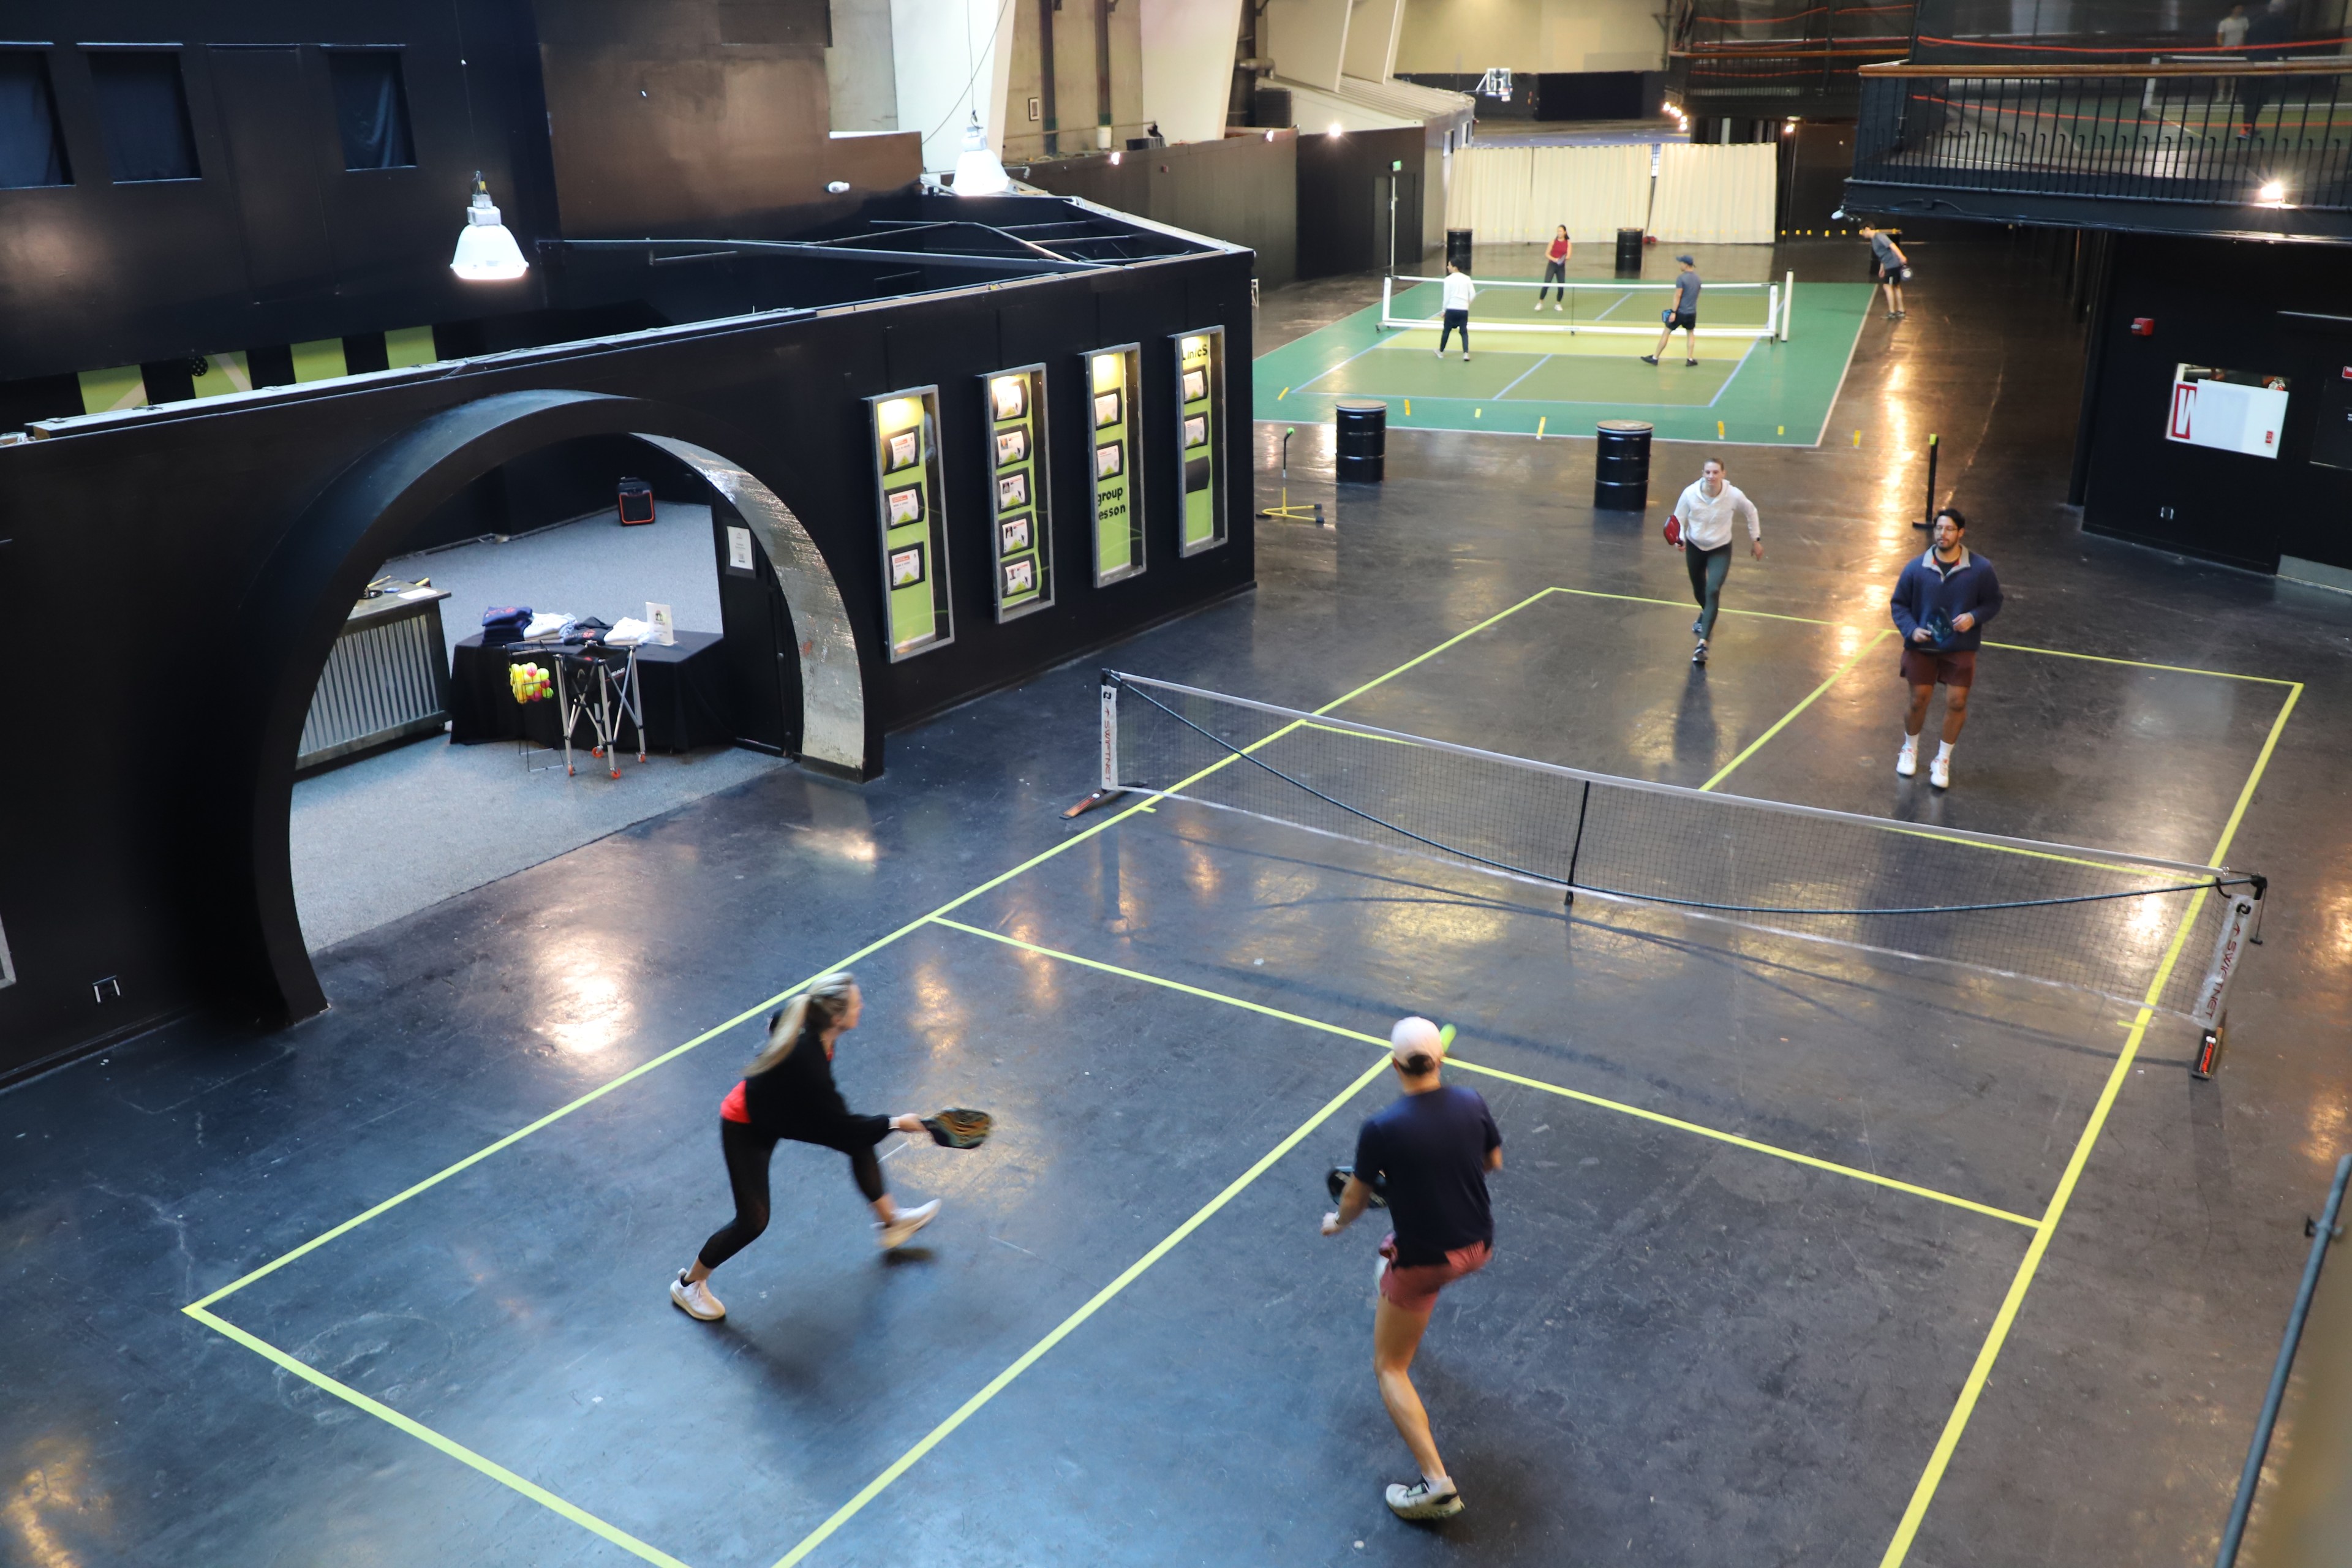 Four people play pickleball indoors with spectators above. Yellow lines mark the court on a dark floor.